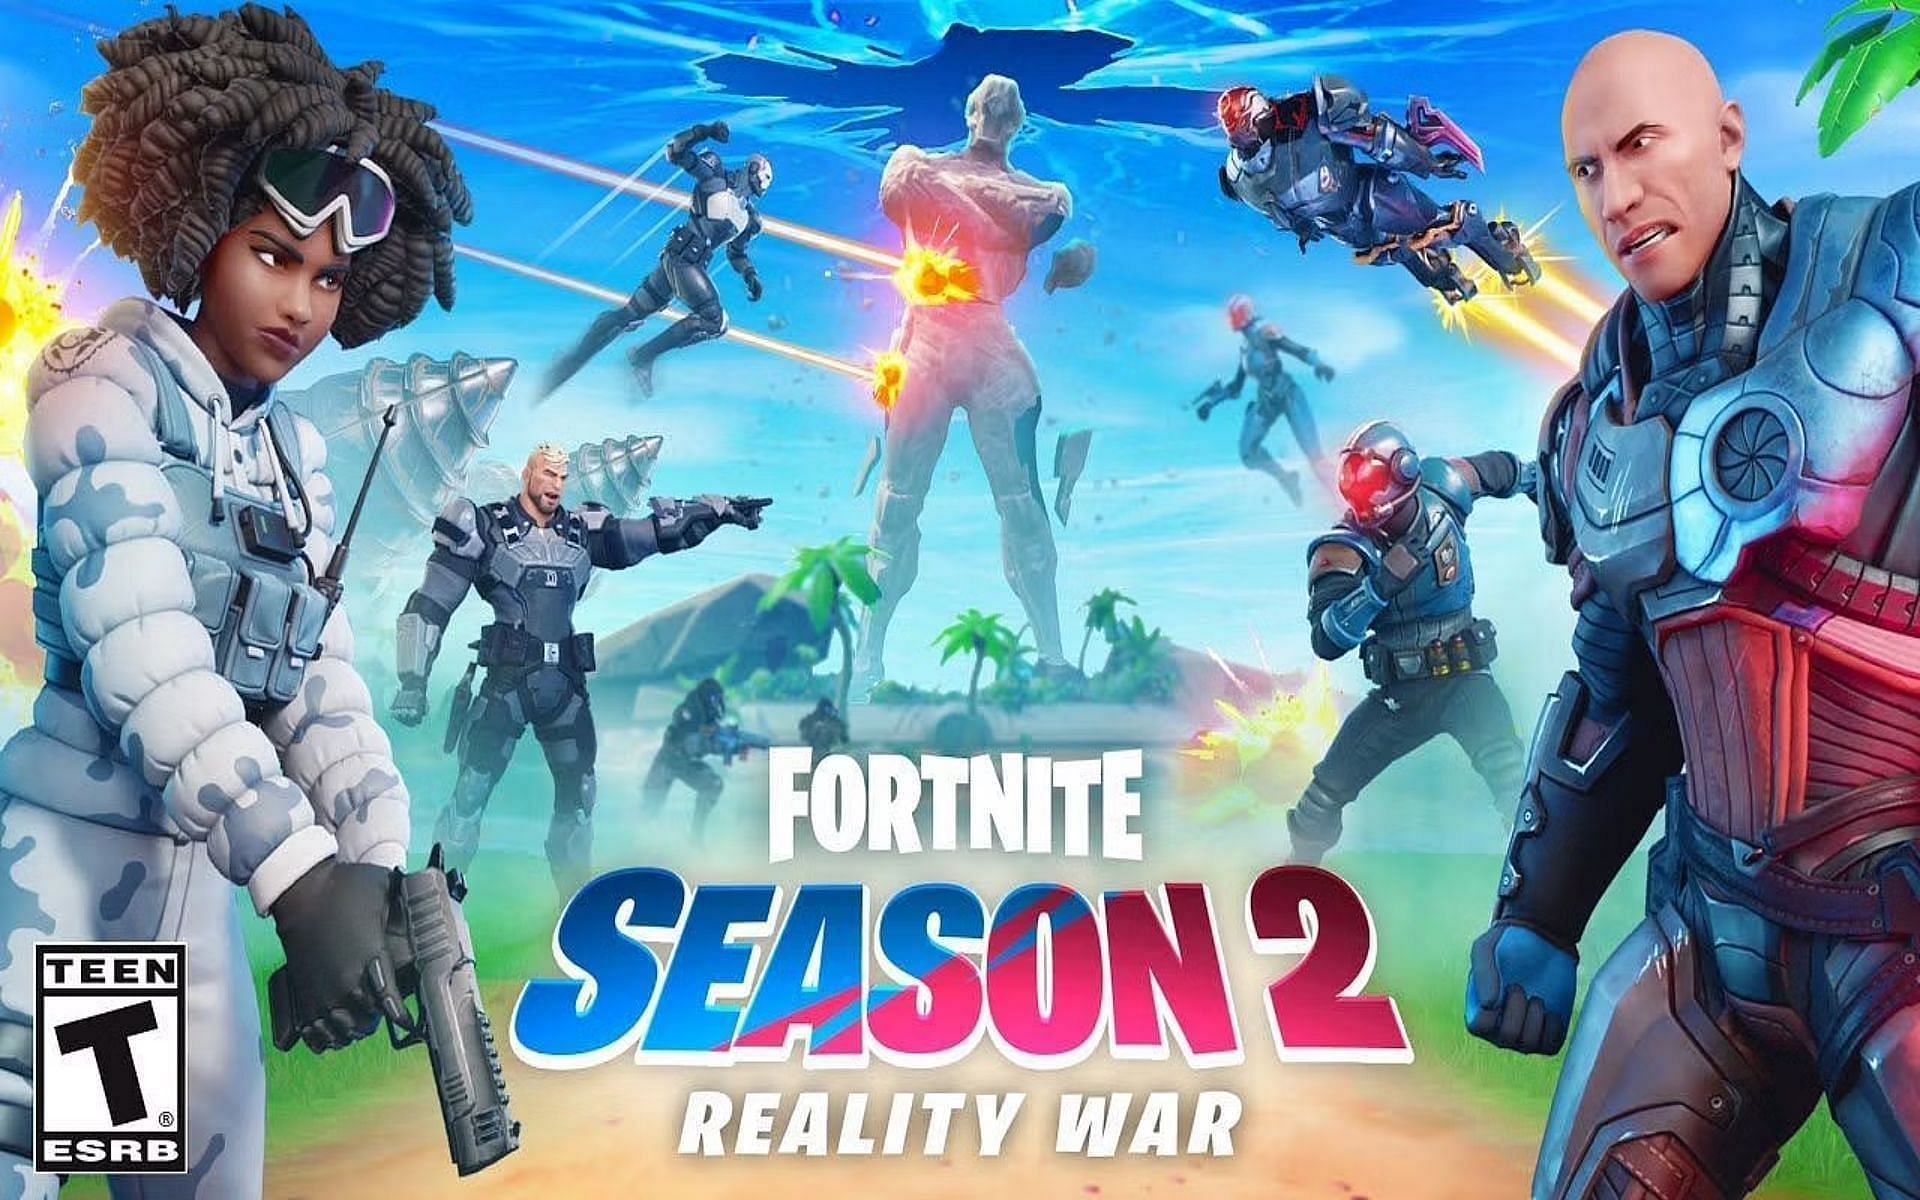 Fortnite Chapter 3 Season 2 will be based on the war between the Imagined Order and The Seven (Image via T5G/Twitter)